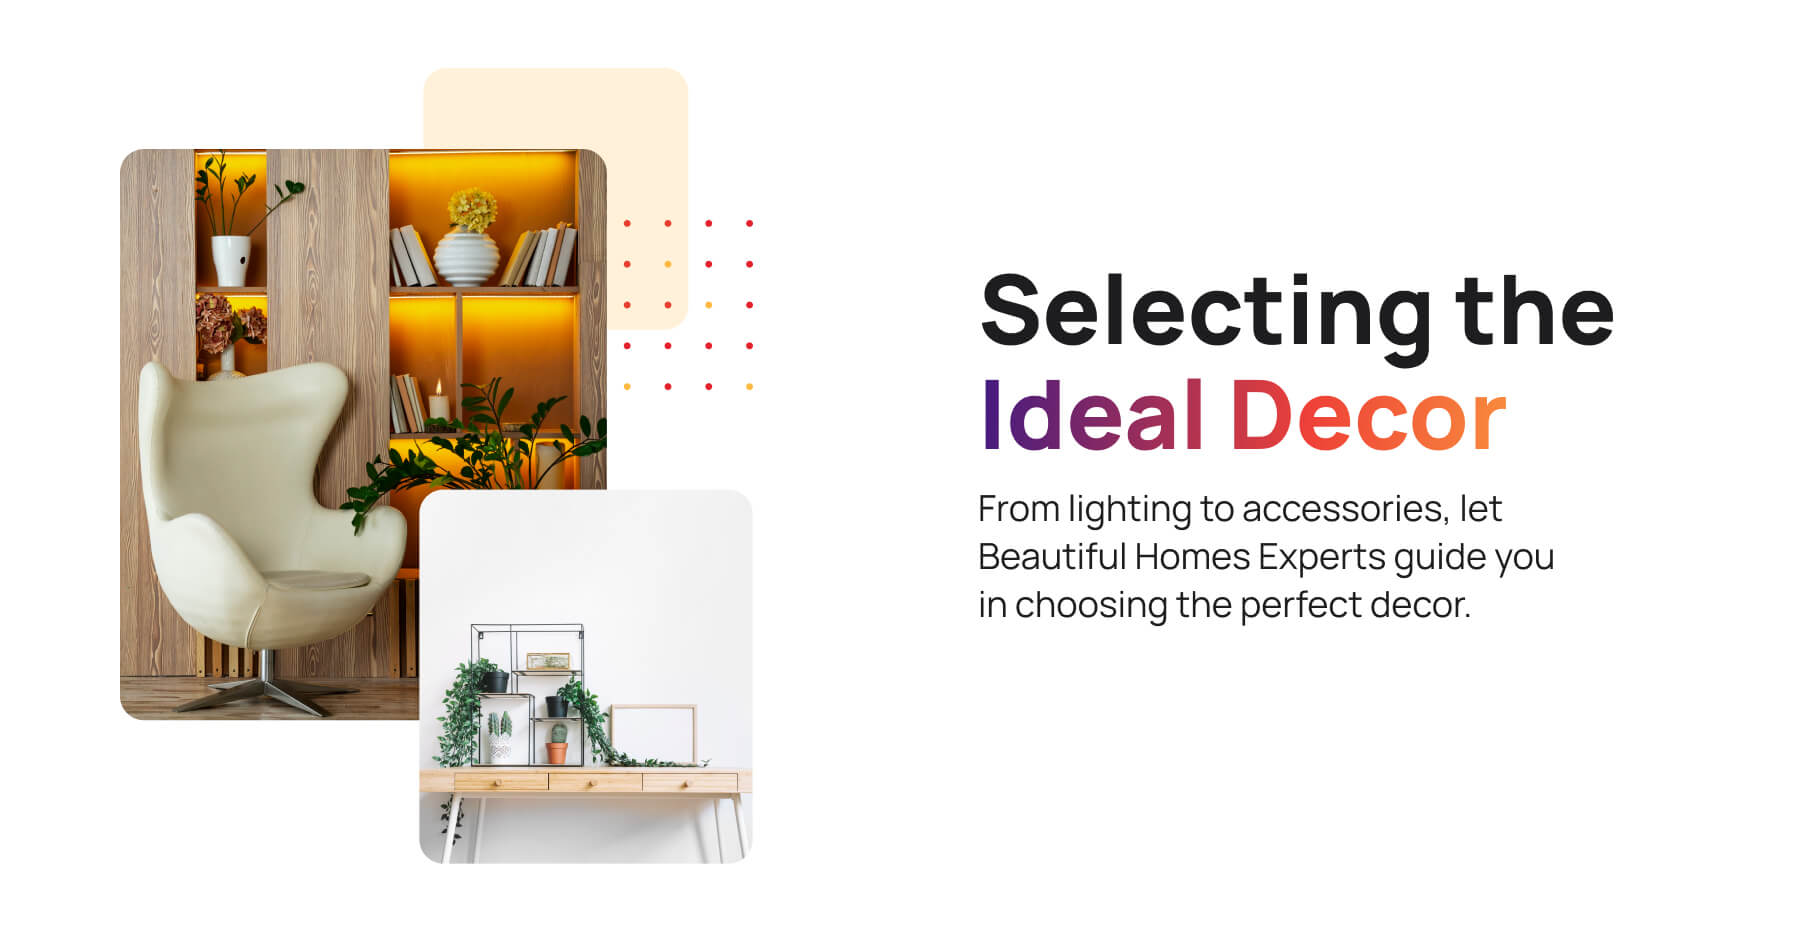 Selecting the Ideal Decor